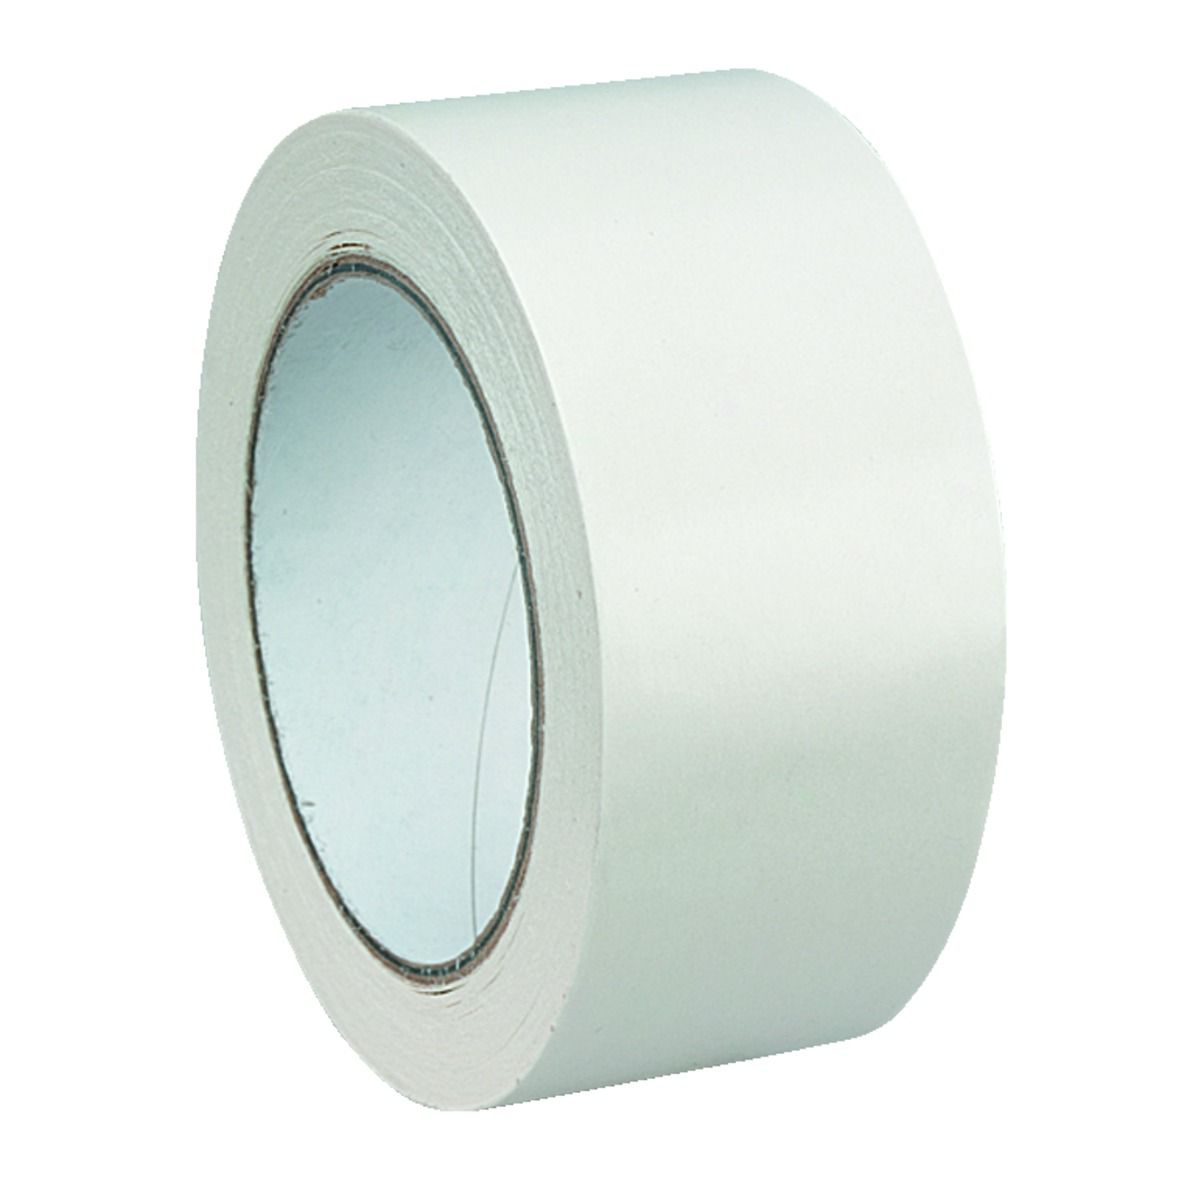 Image of Wickes Double Sided Flooring Tape Cream 50mm x 25m